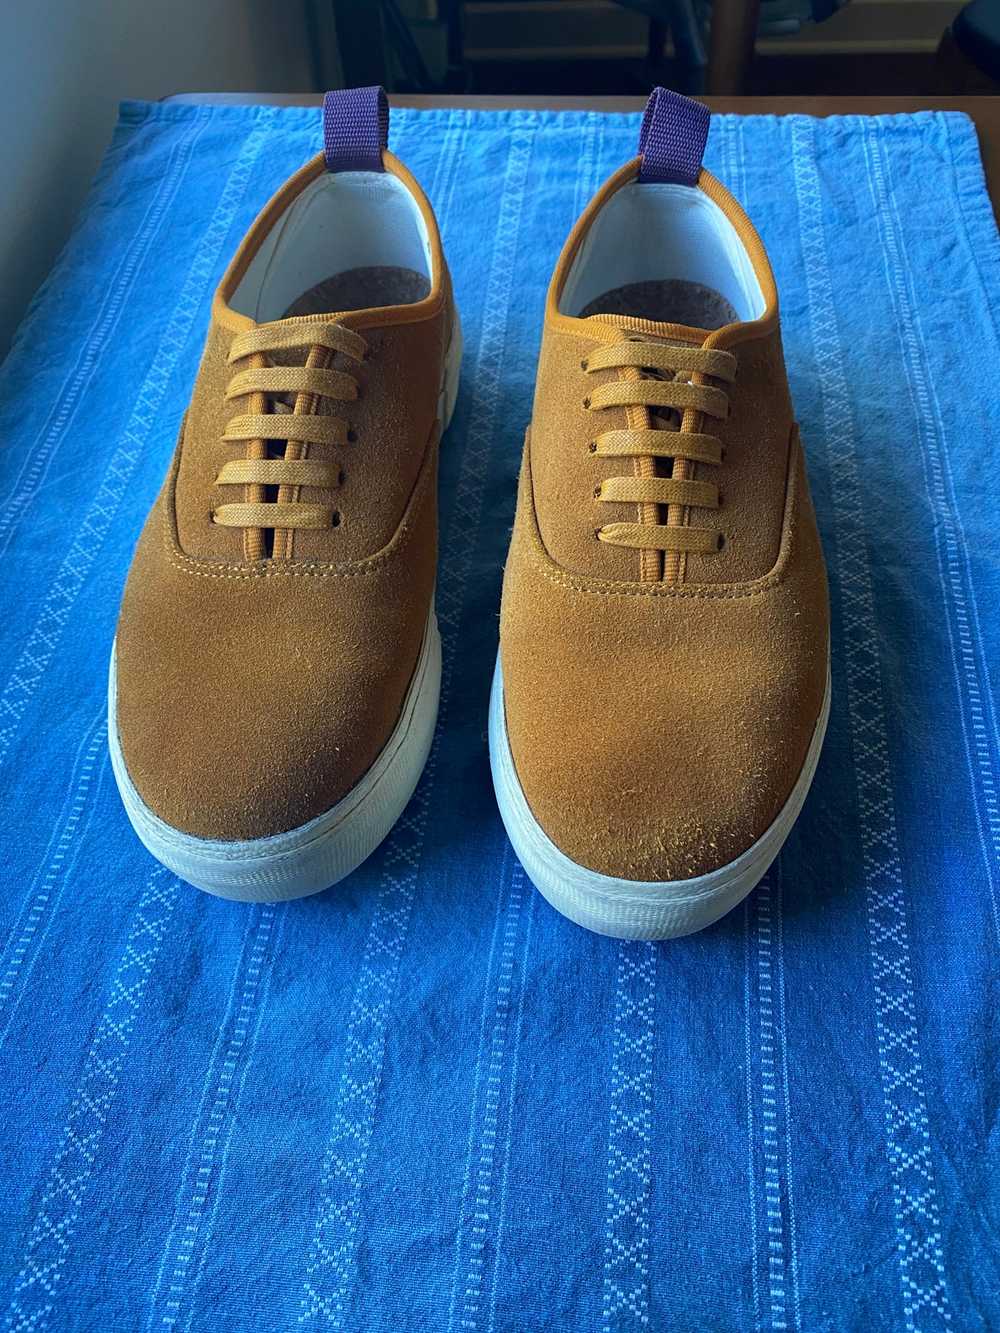 Eytys Eytys Mother Suede Camel Sneakers - image 2